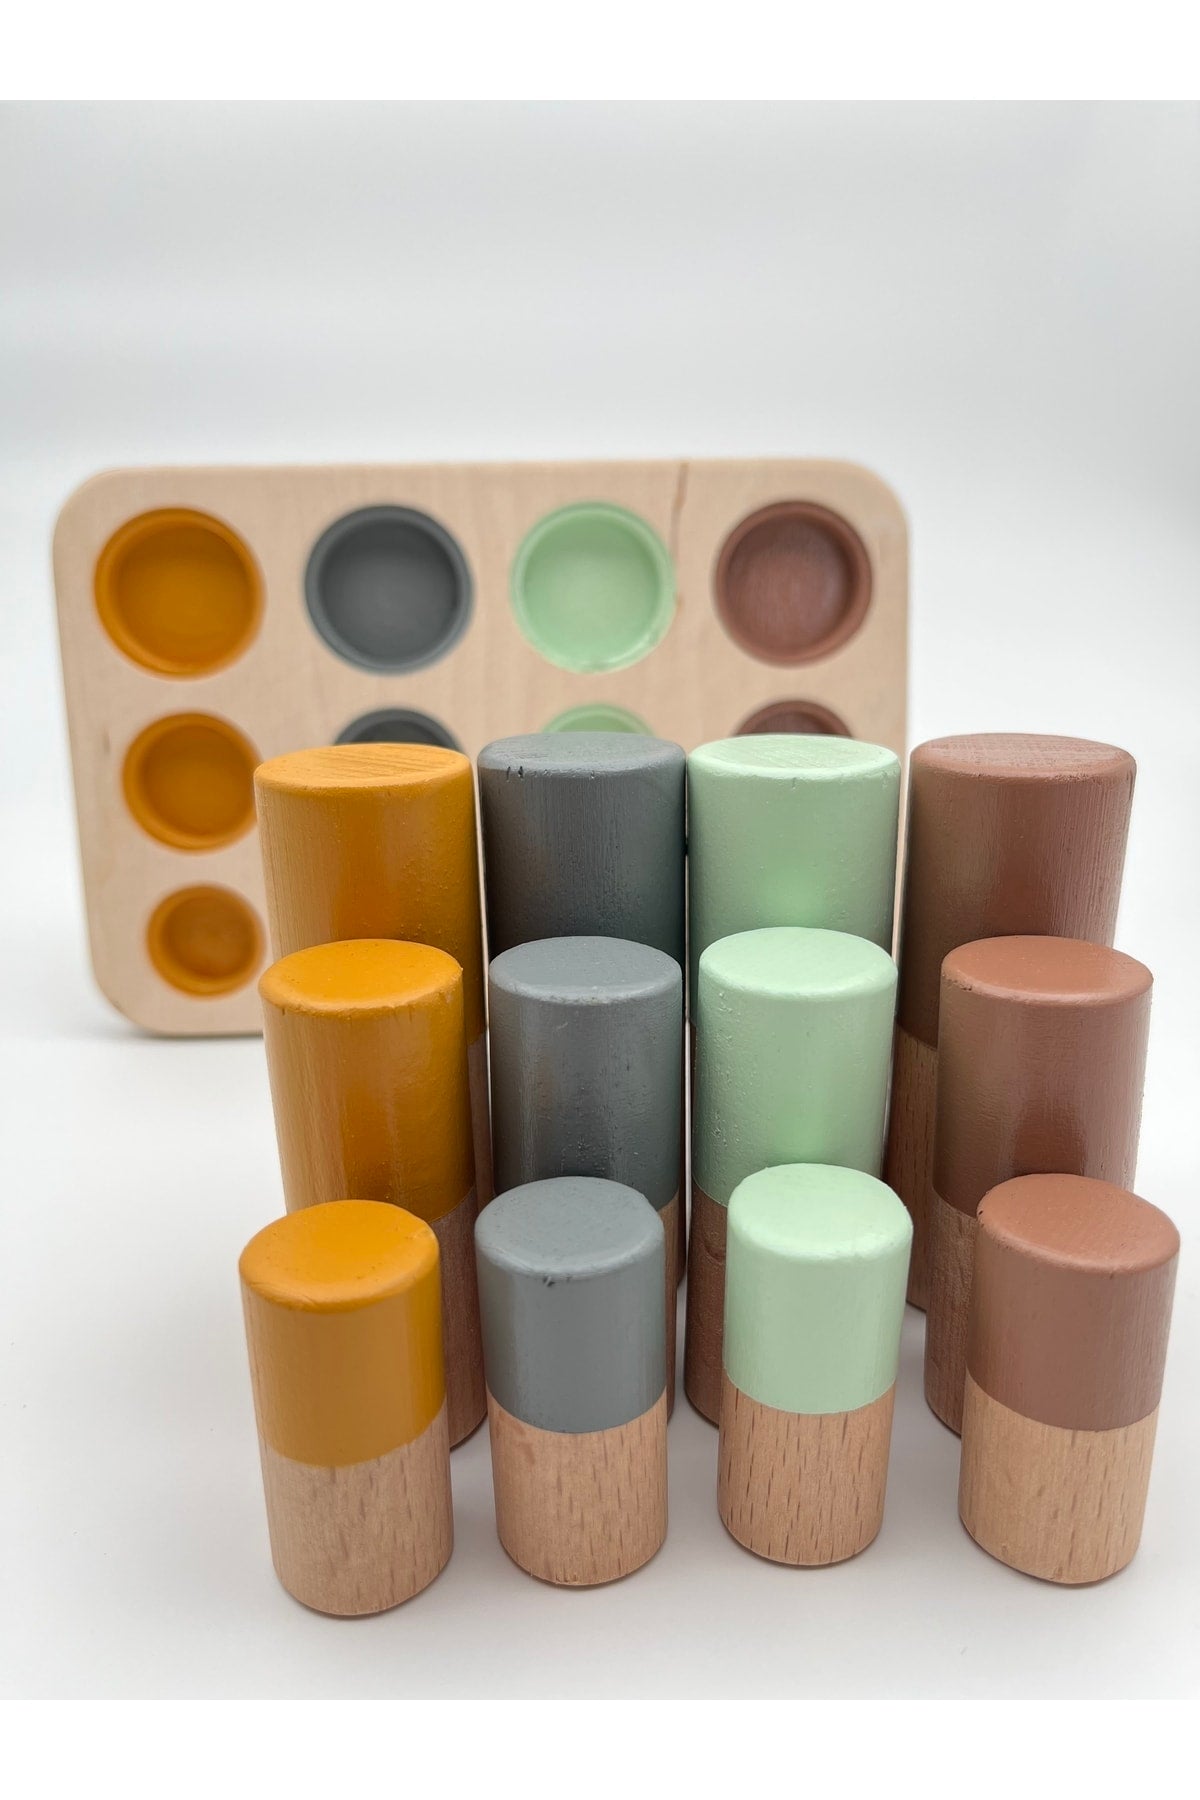 Montessori Cylinders with Matching Table, Color And Size Matching Wooden Toy